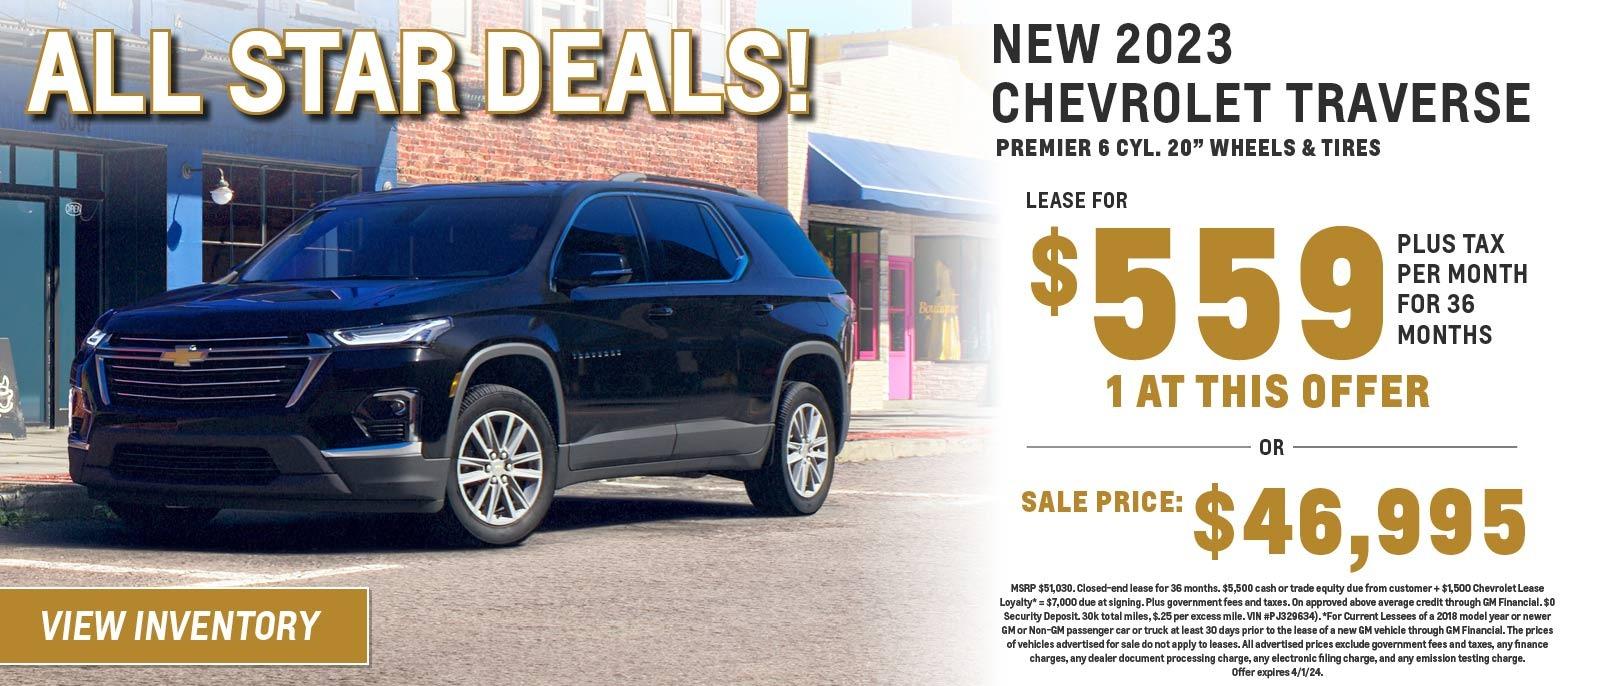 New 2023 Chevrolet Traverse
Lease for $559 plus tax per month for 36 months
1 at this offer
0r
Sale Price $46,995